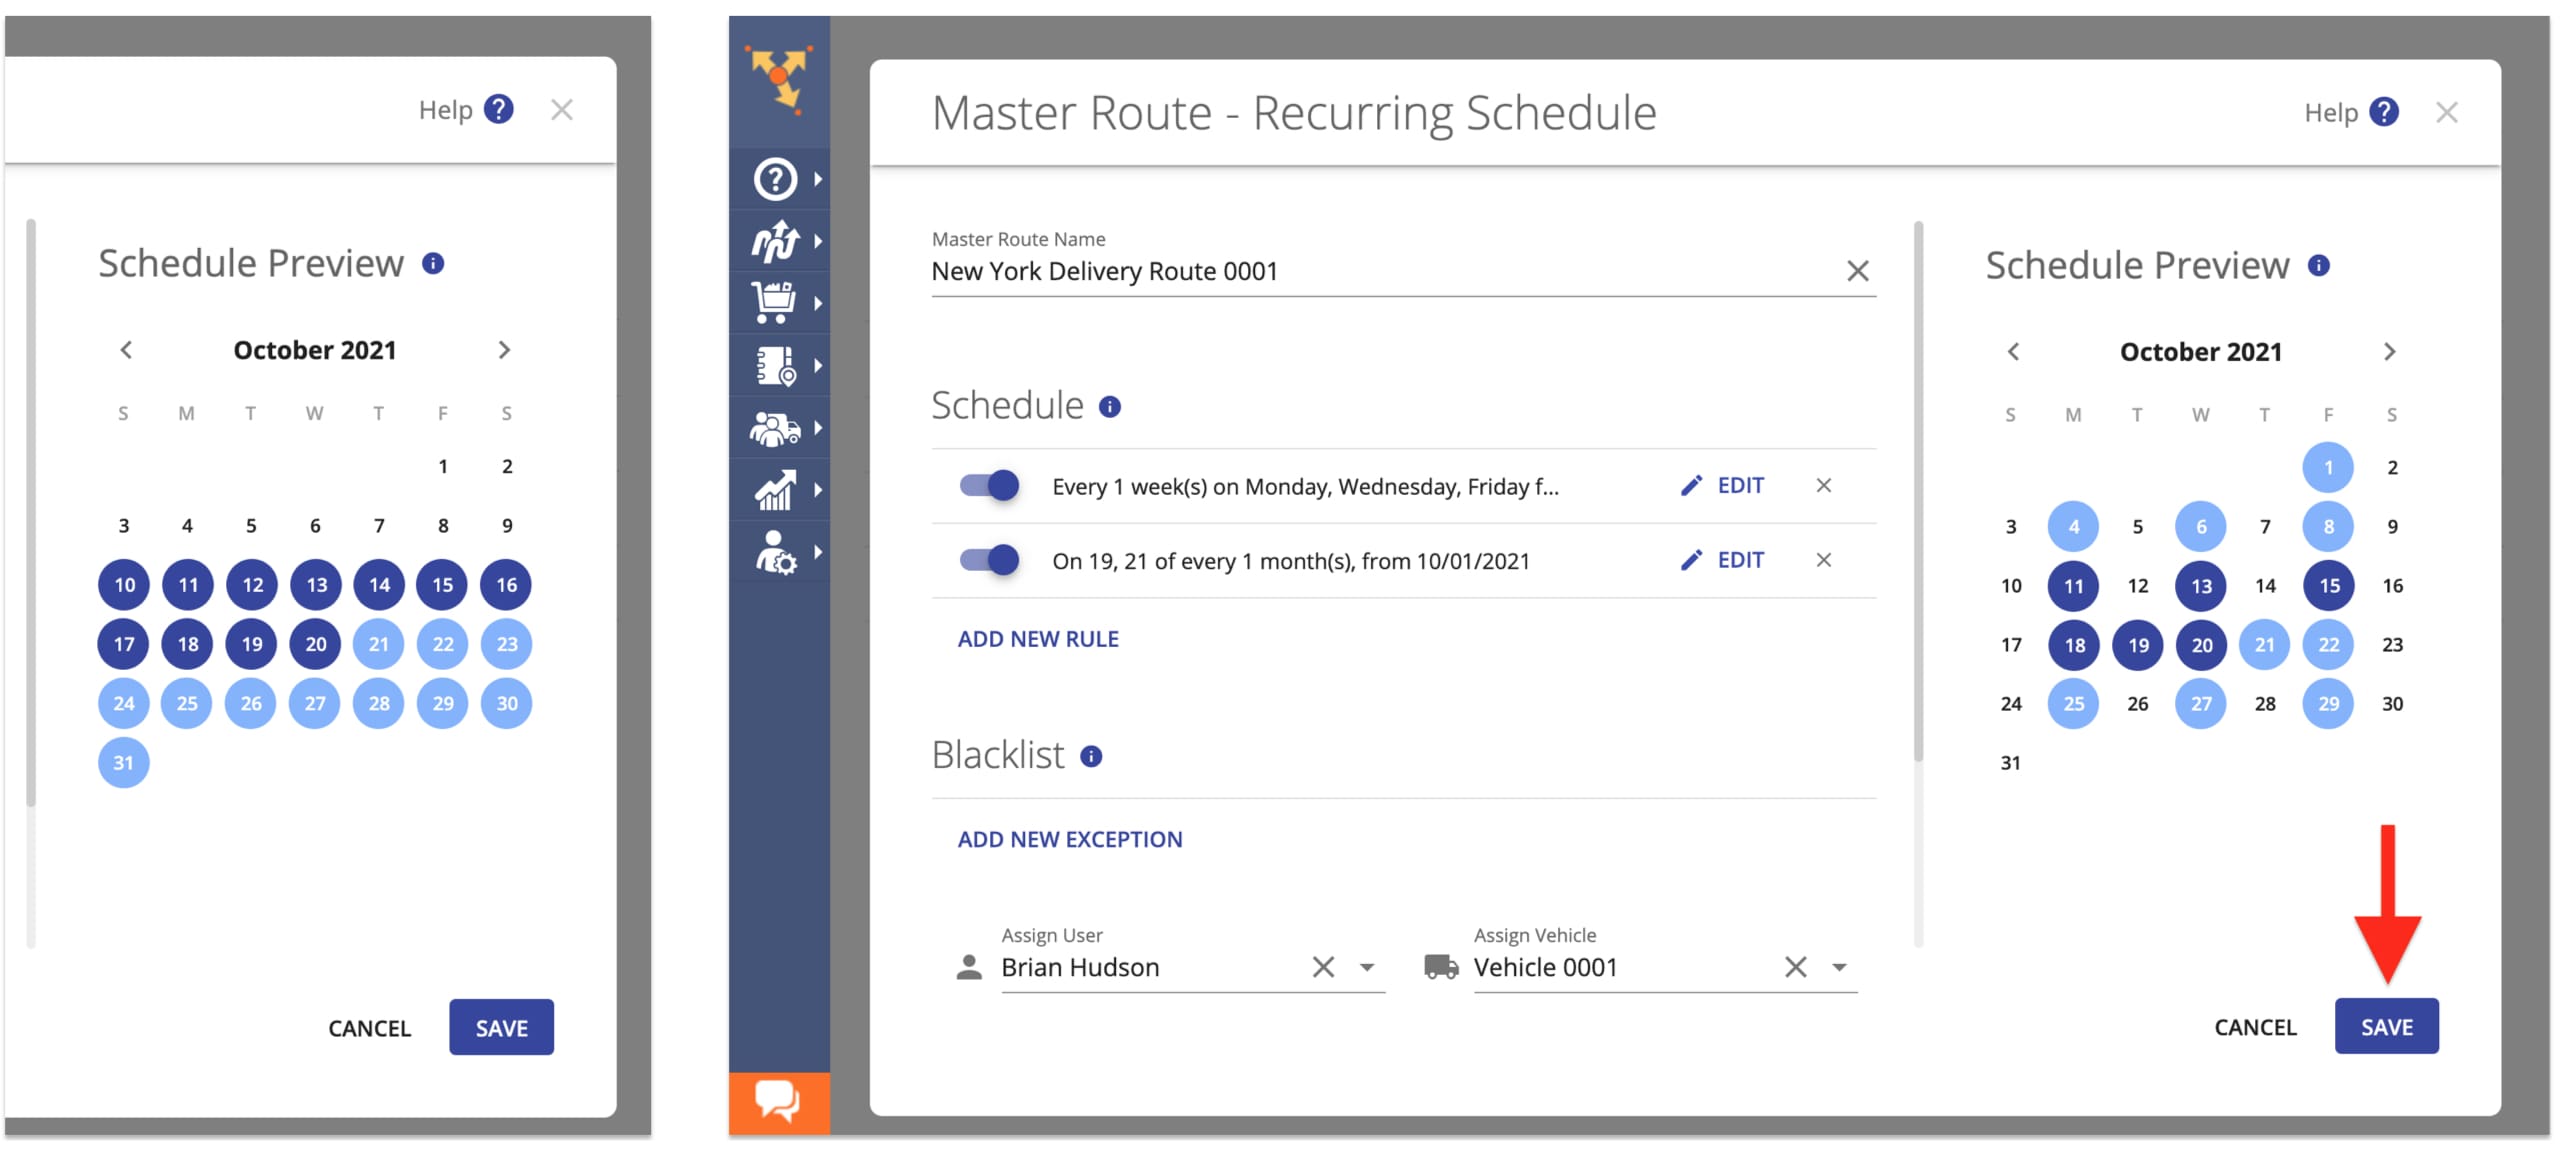 After editing schedule rules or adding new route calendar rules, apply changes to replan routes.